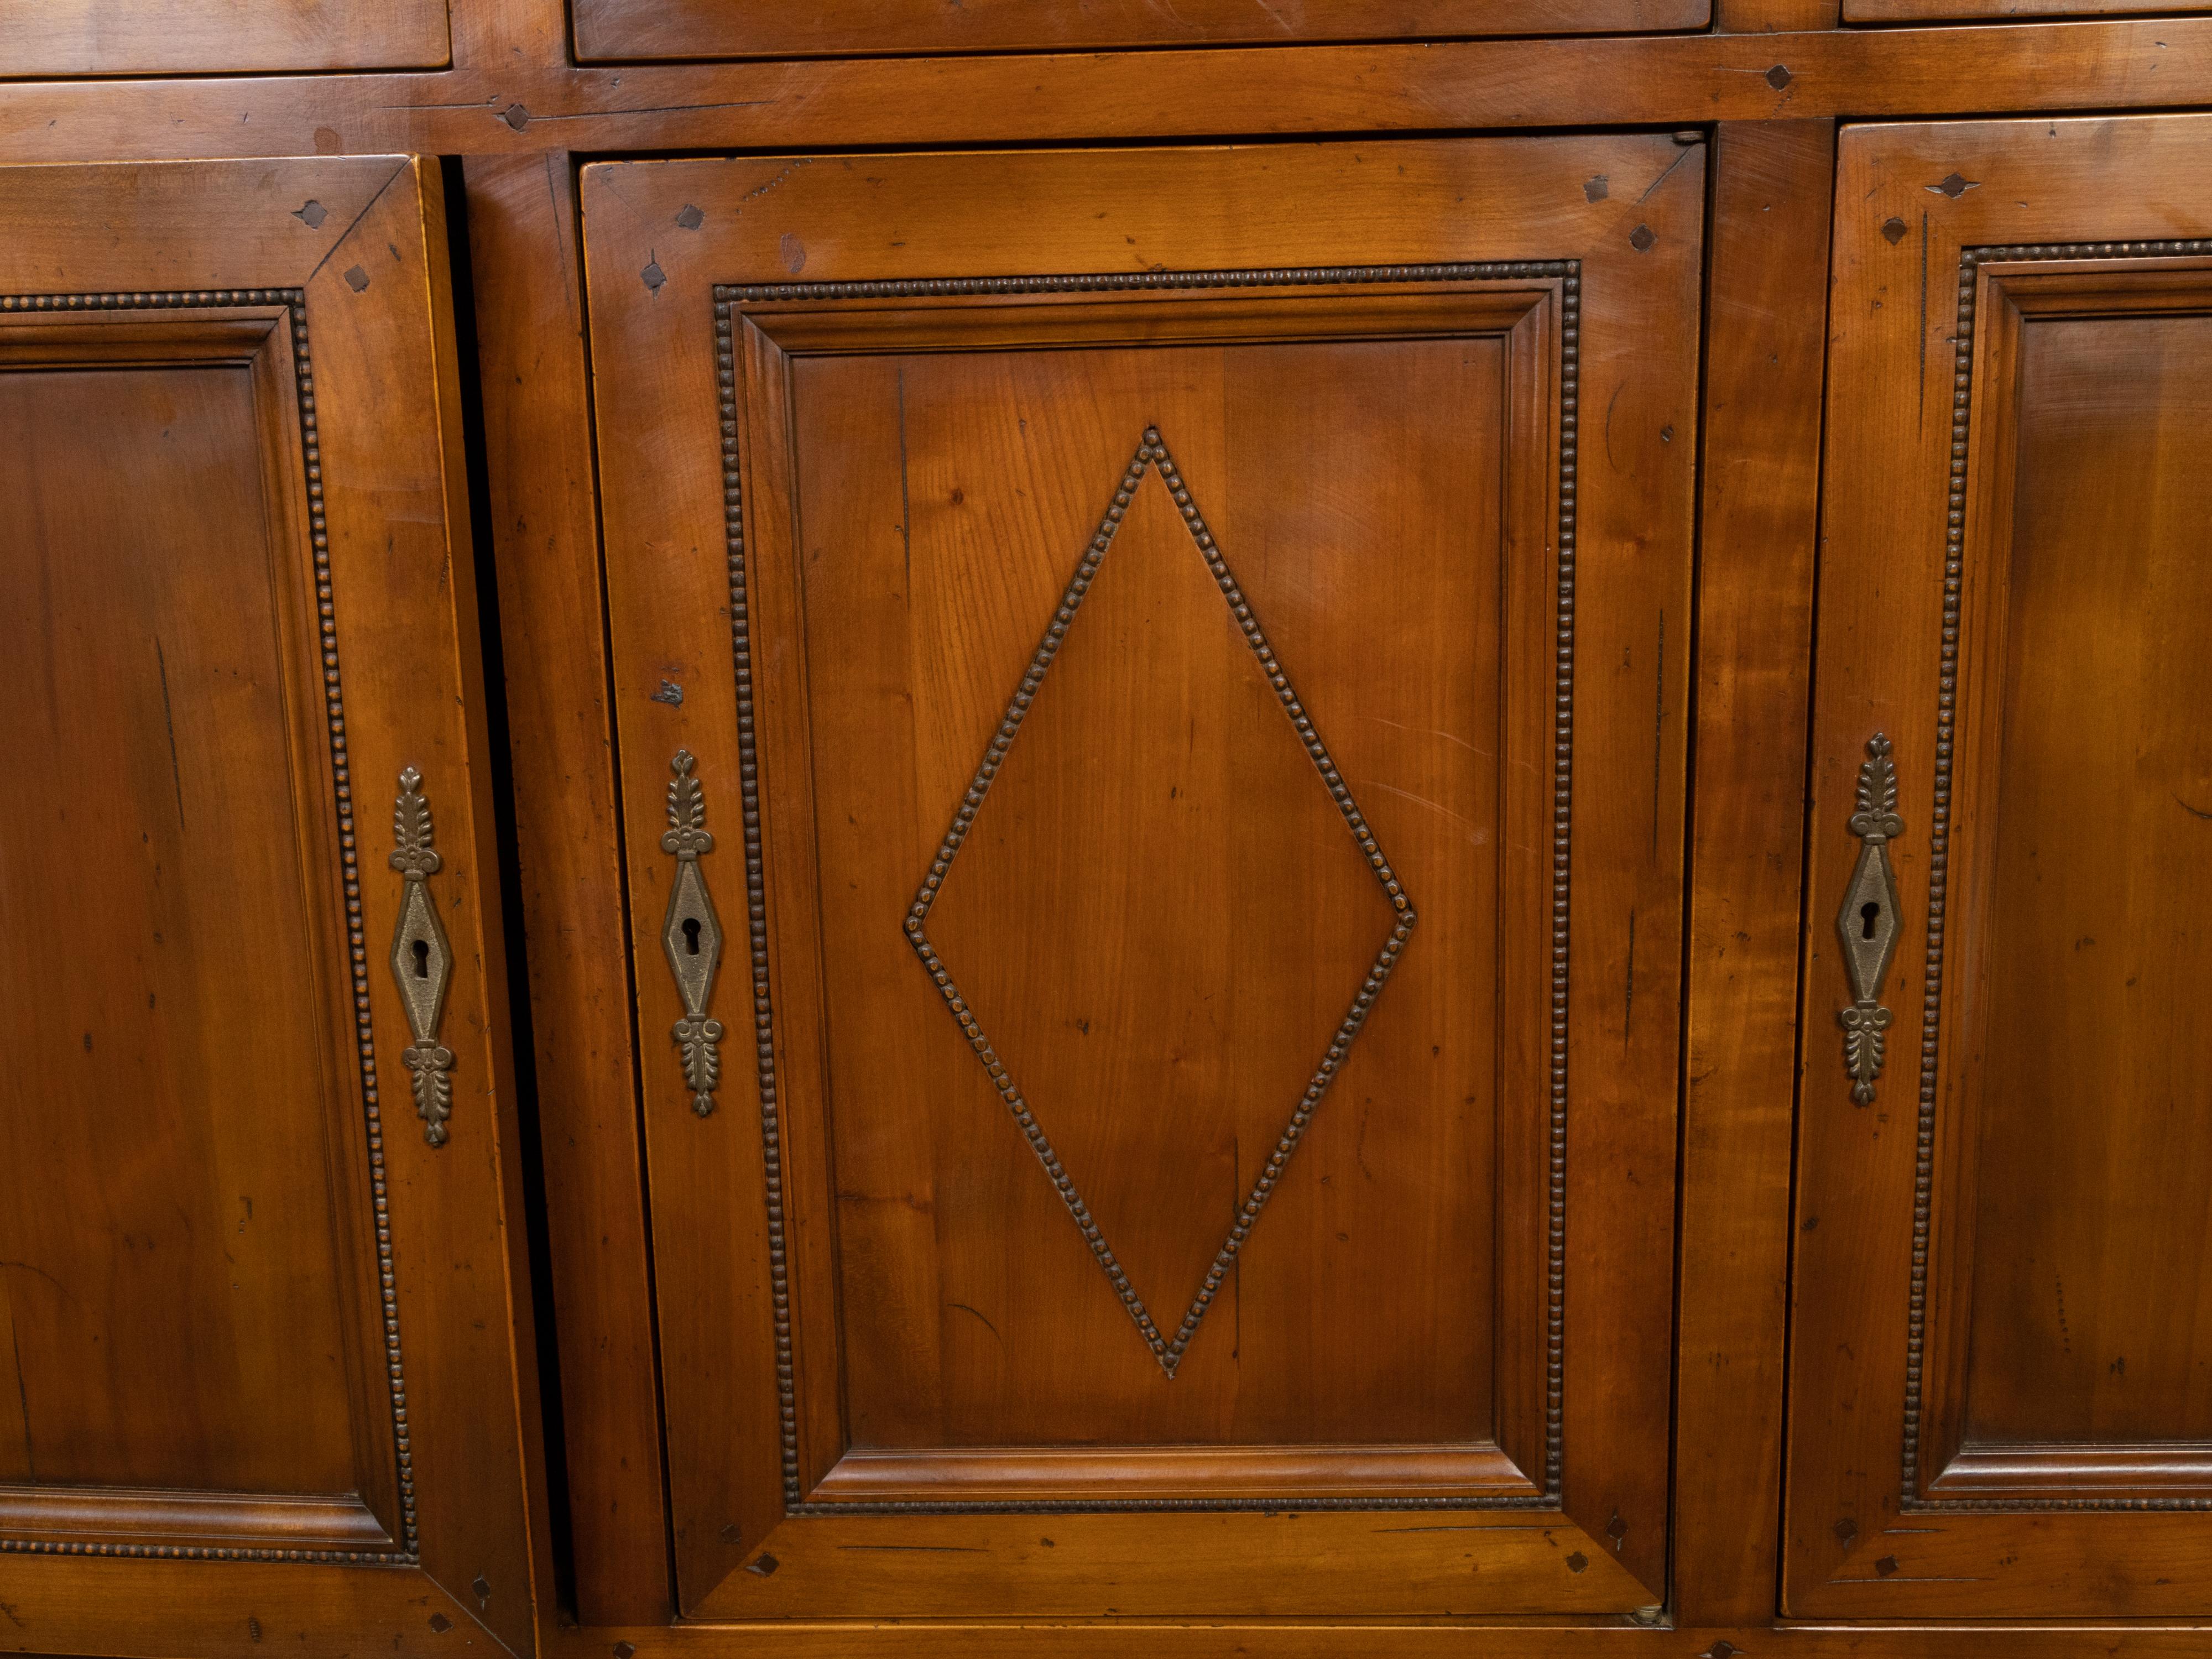 French 1940s Walnut Enfilade with Drawers, Doors, Carved Beads and Diamond Motif For Sale 5